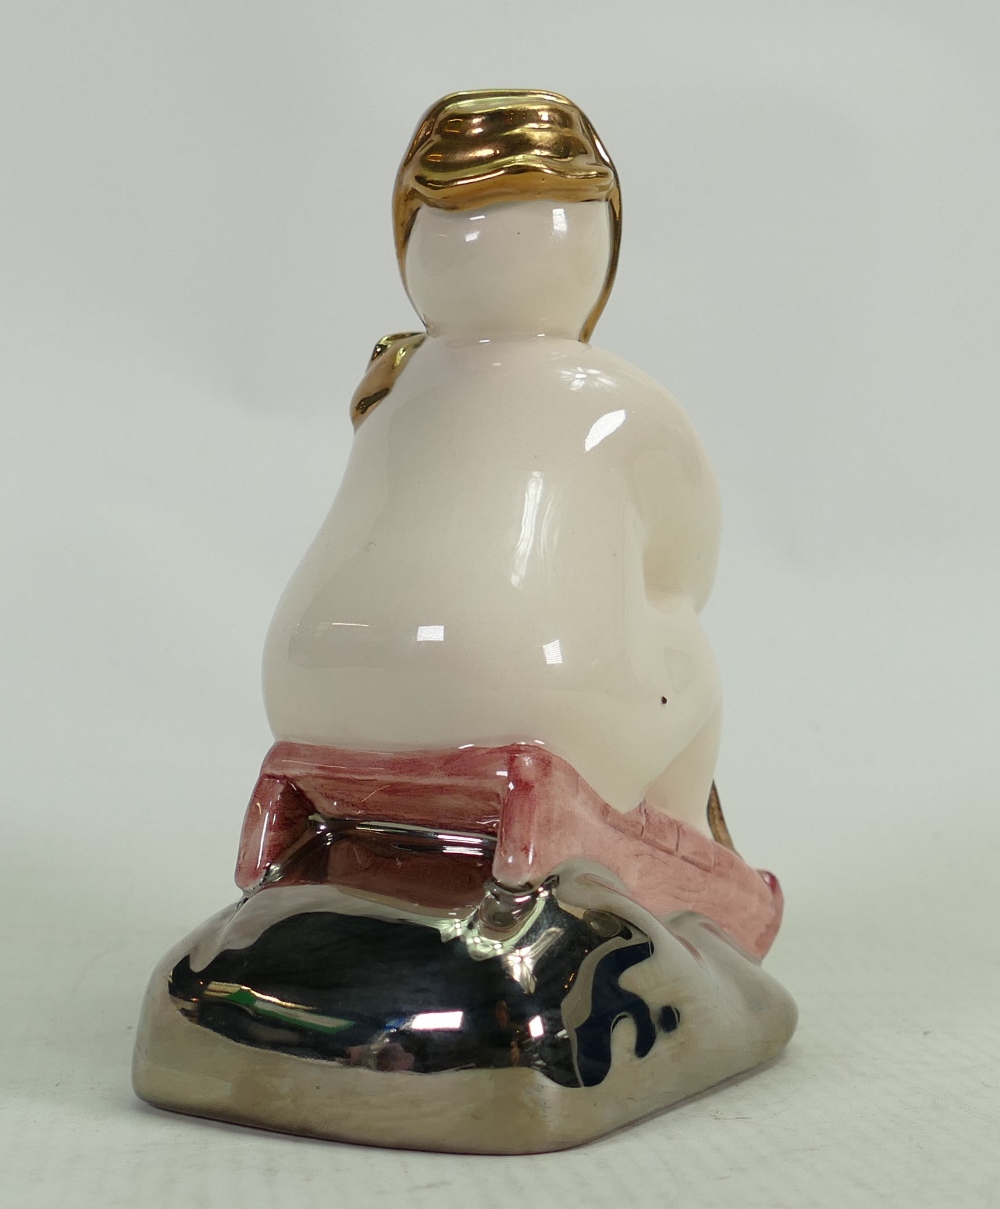 Royal Doulton Snowman prototype figure Tobogganing: In a different colourway with silver & gold - Image 3 of 3